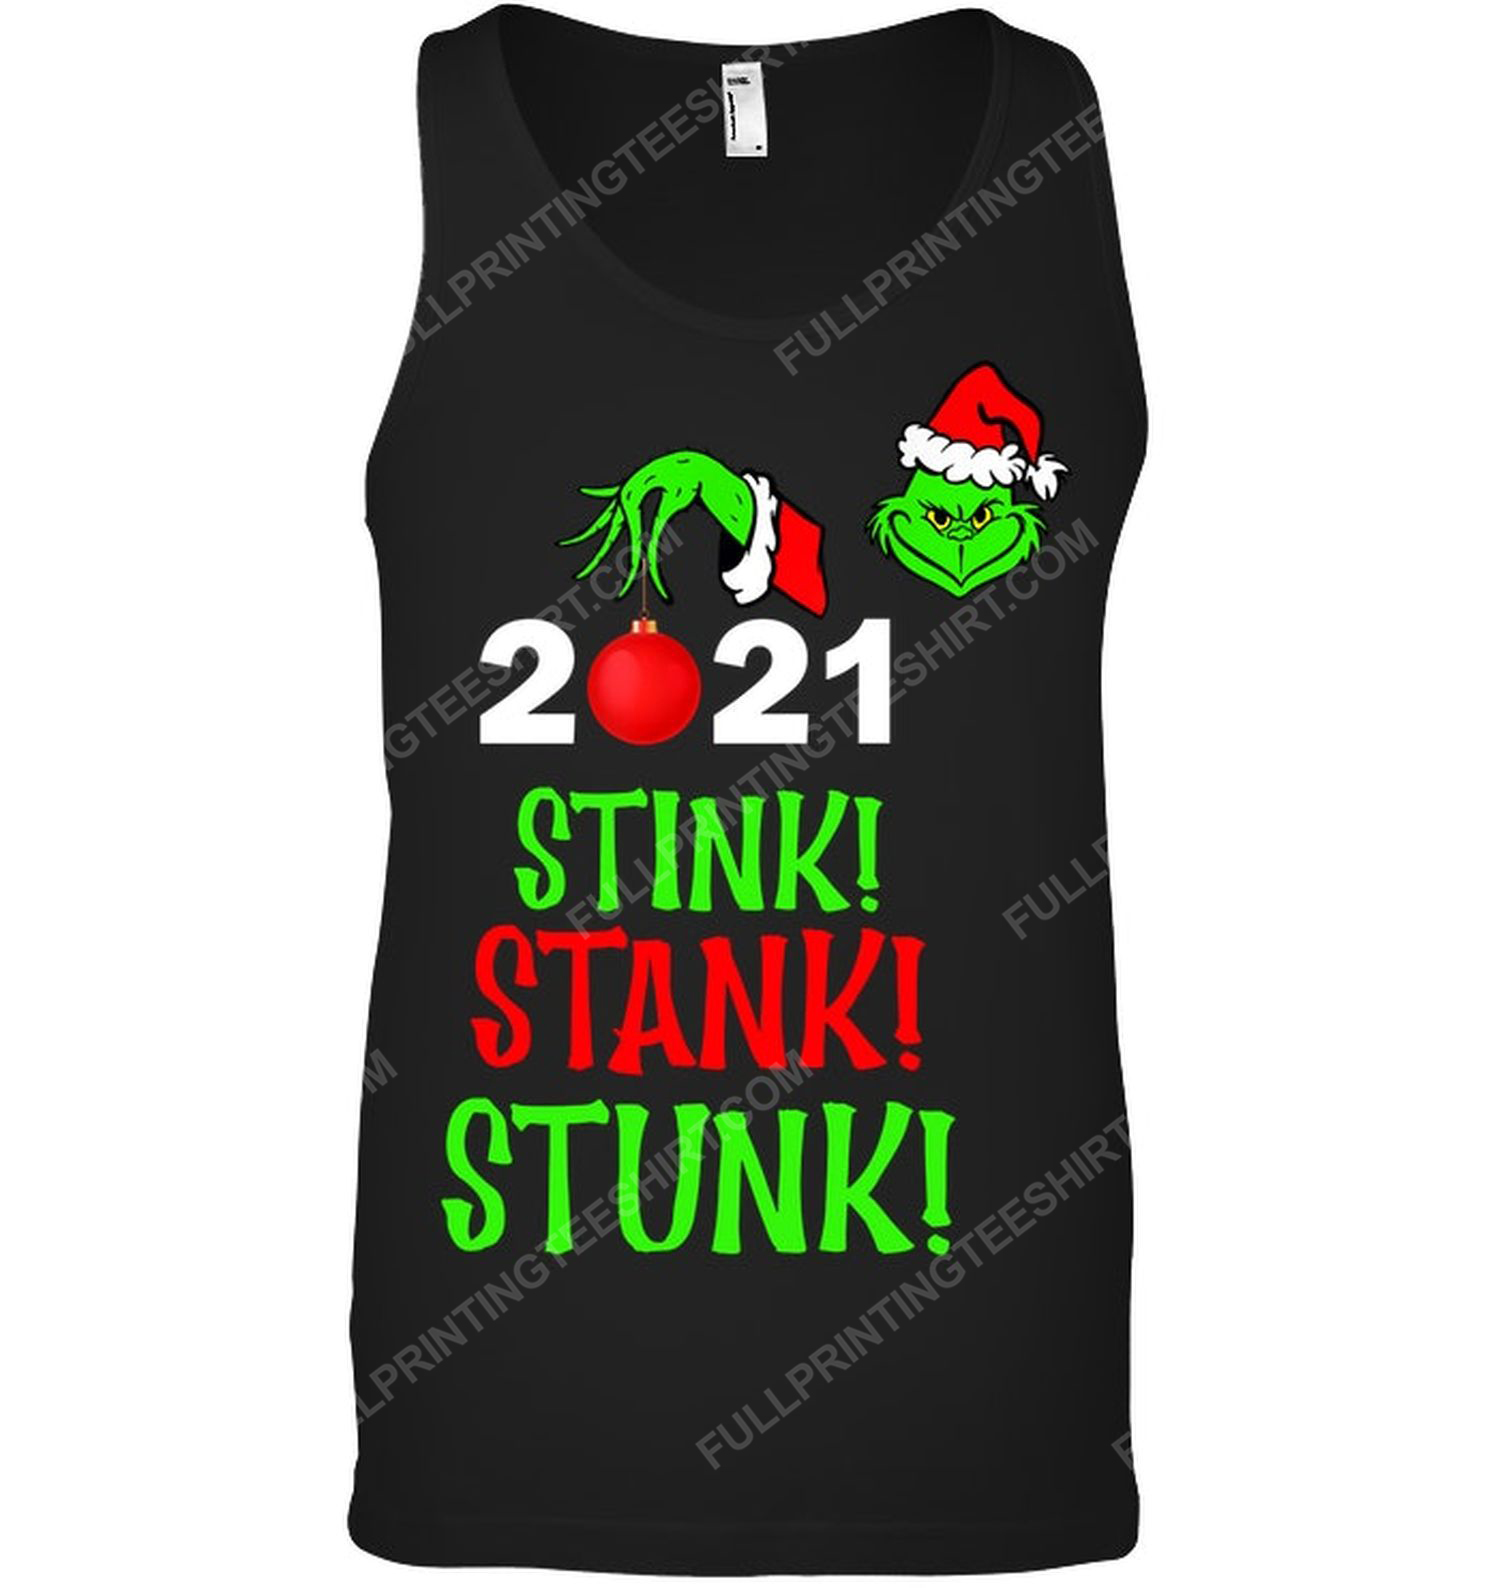 For christmas the grinch stink stank stunk 2021 tank top